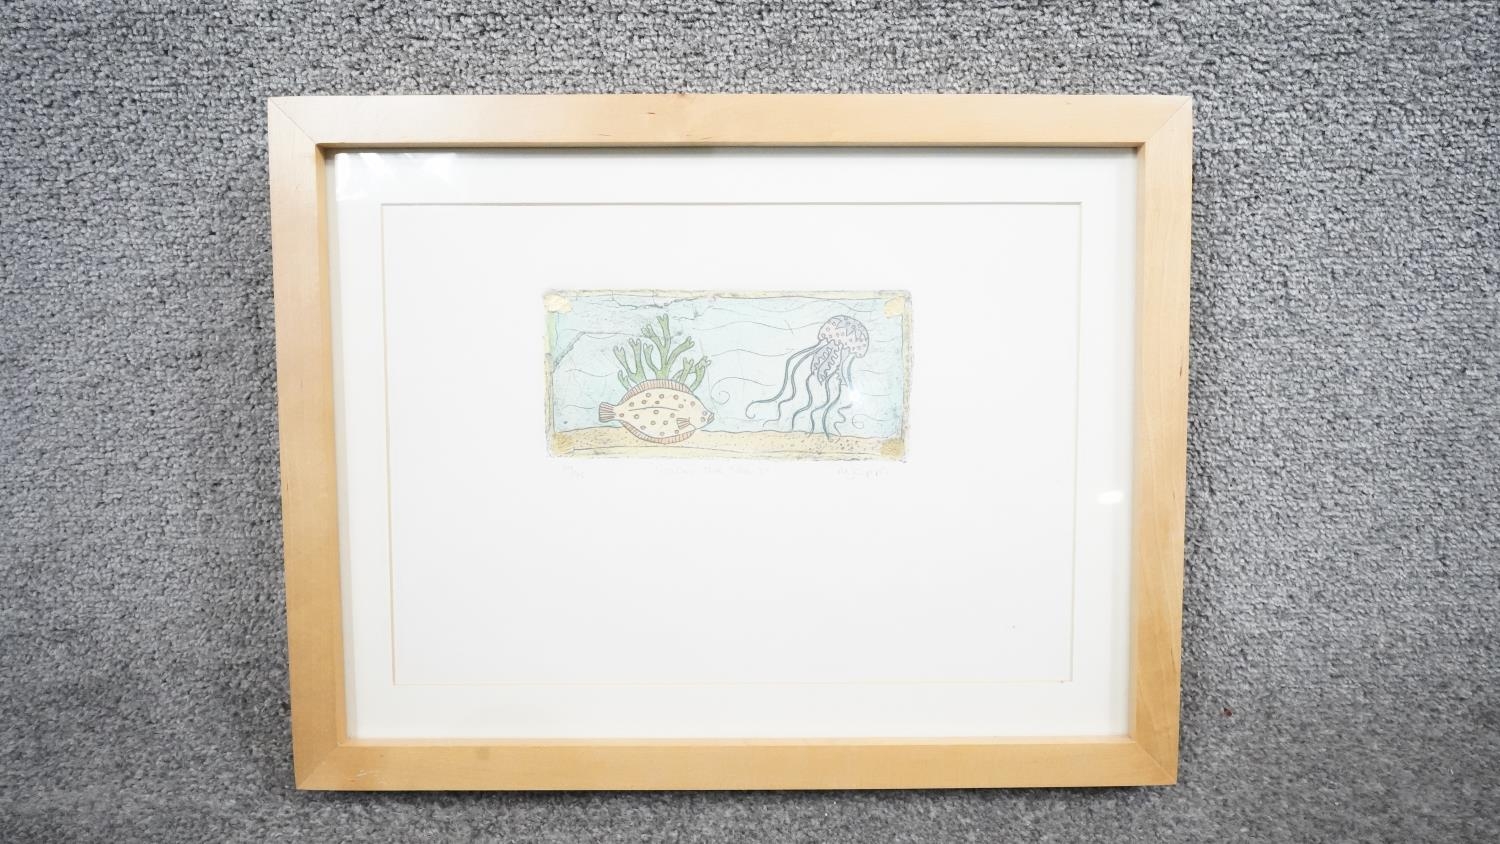 Two framed and glazed signed limited edition sea life prints signed M. J. Epps. One of a starfish - Image 2 of 8